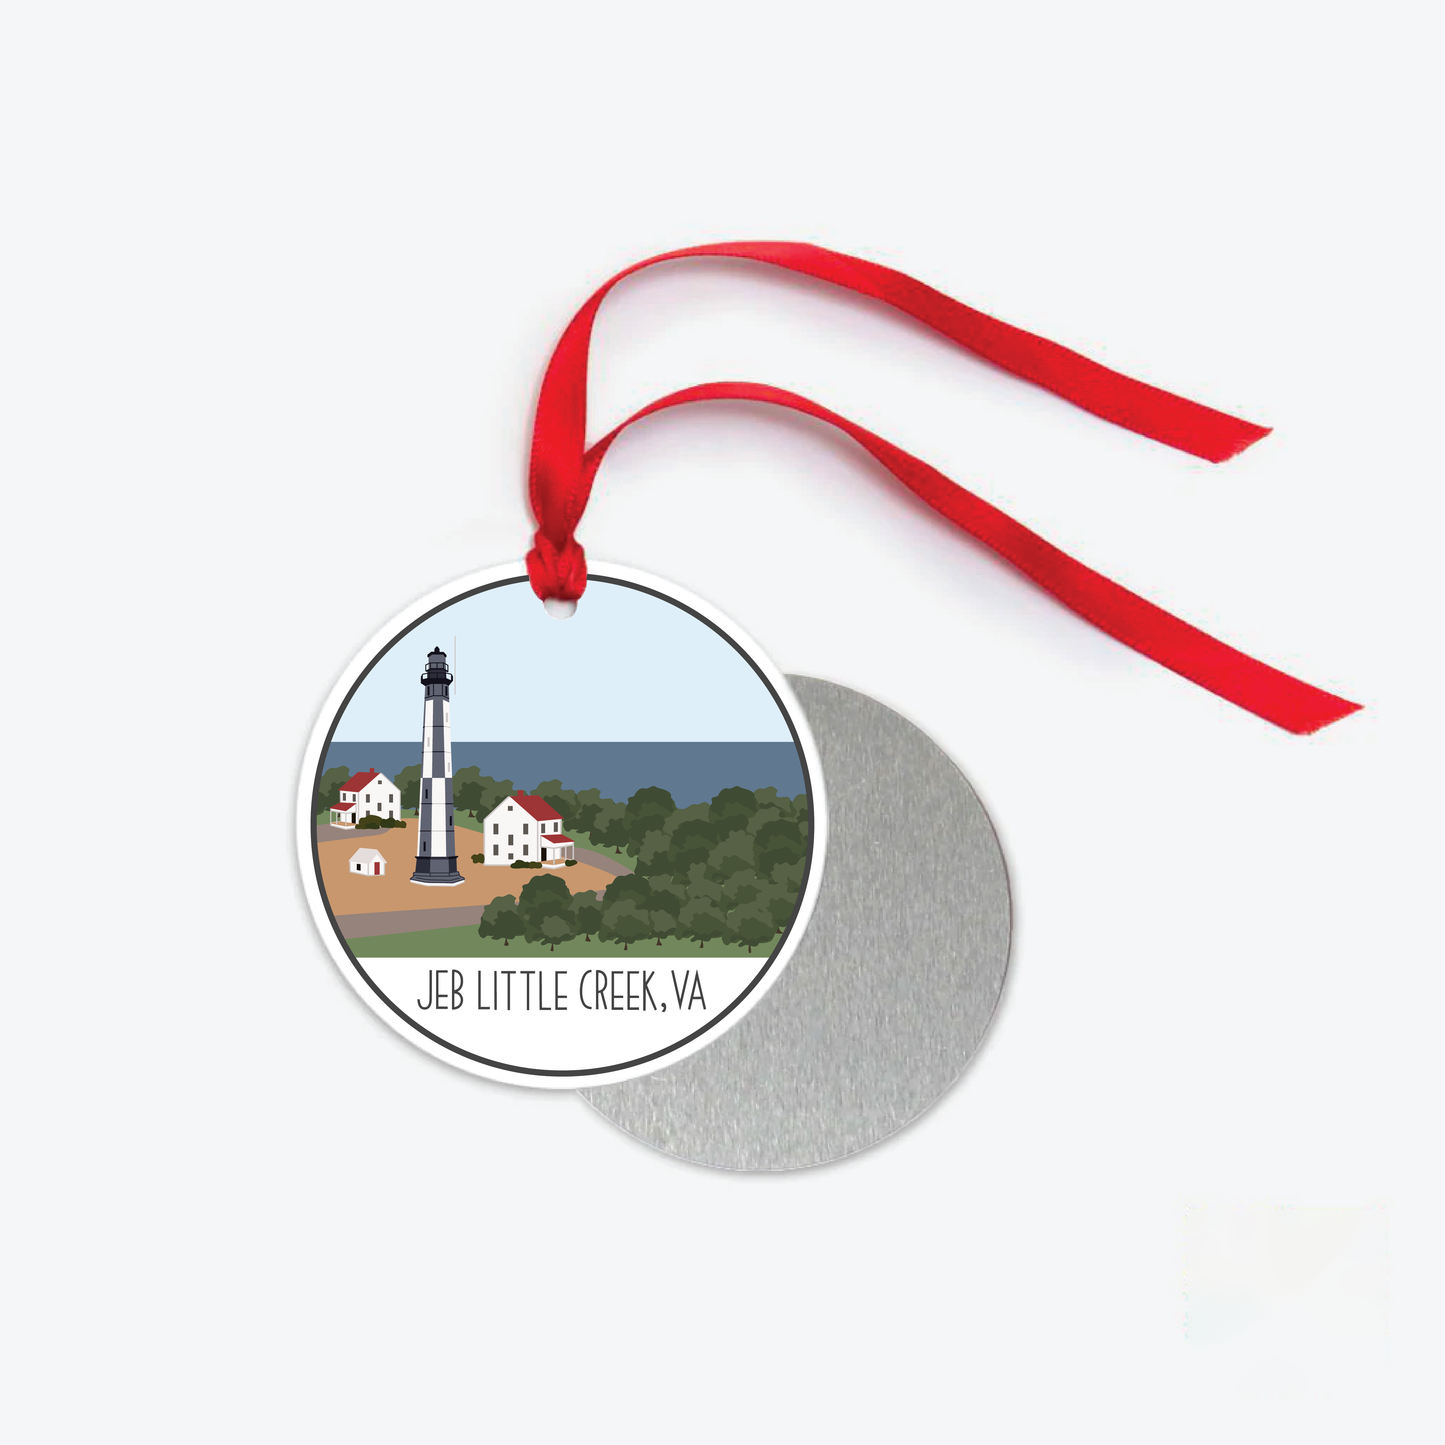 joint expeditionary base little creek ornament one sided